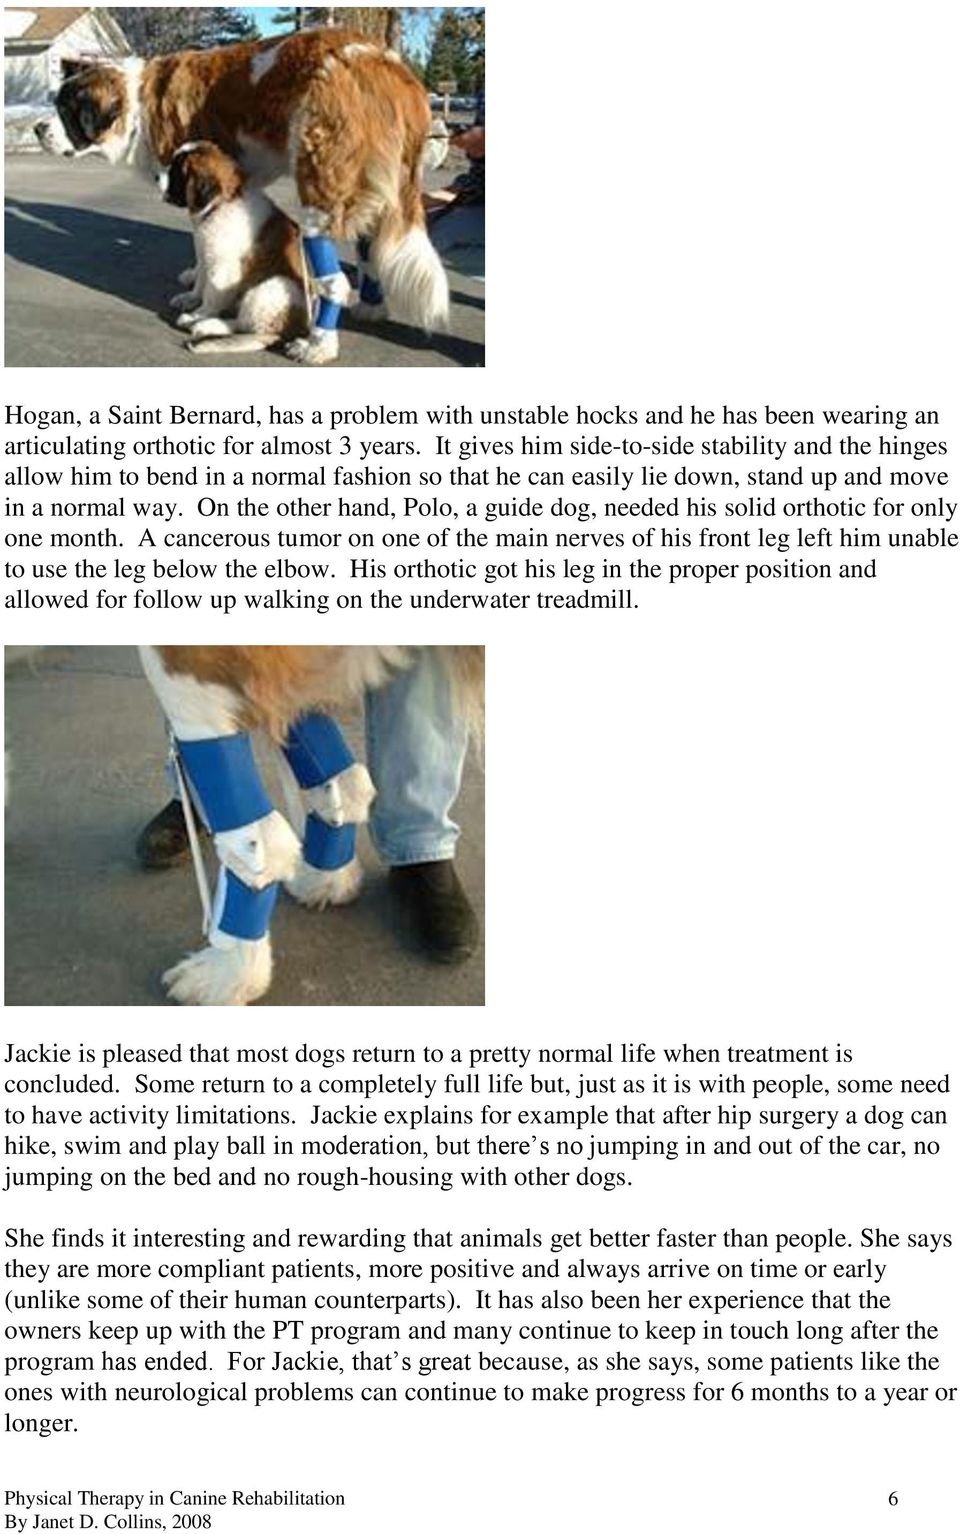 On the other hand, Polo, a guide dog, needed his solid orthotic for only one month. A cancerous tumor on one of the main nerves of his front leg left him unable to use the leg below the elbow.